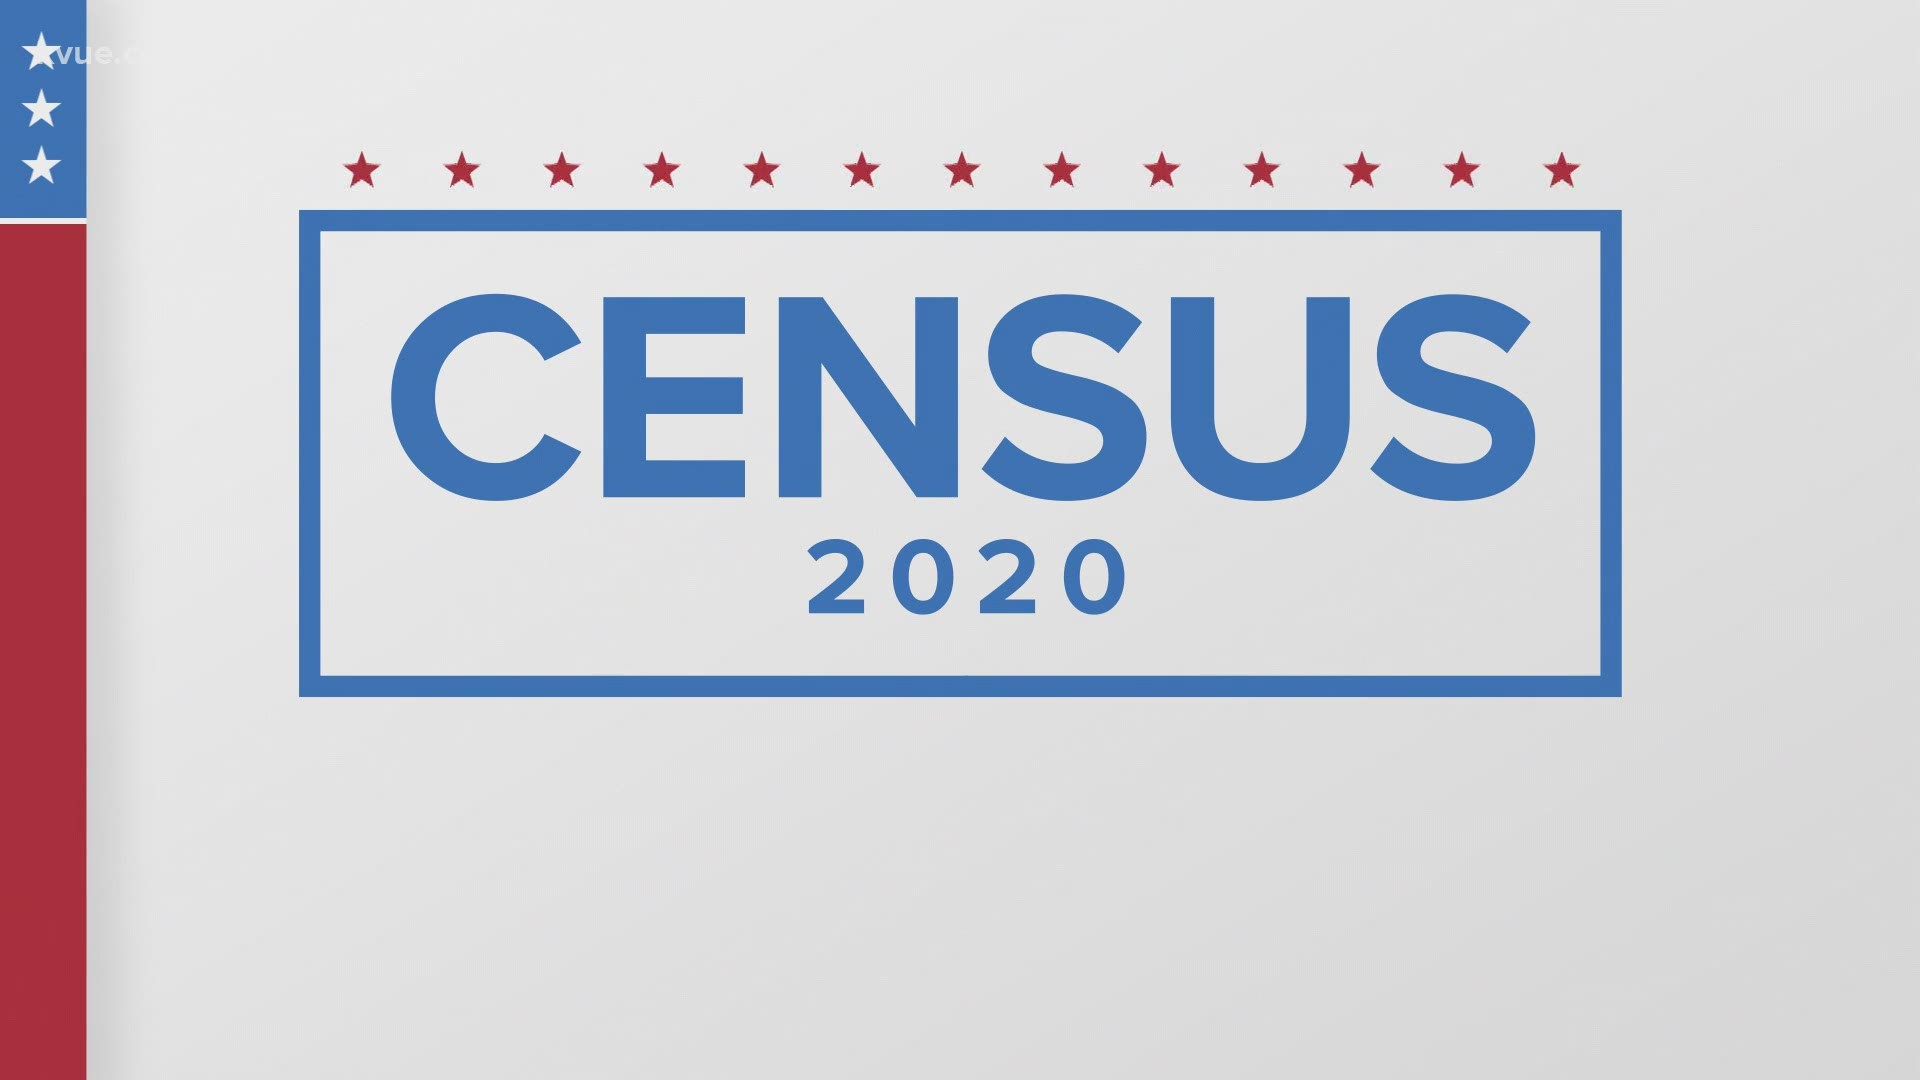 The 2020 Census can end early according to a ruling from the U.S. Supreme Court. Luis de Leon explains why the court's ruling matters.